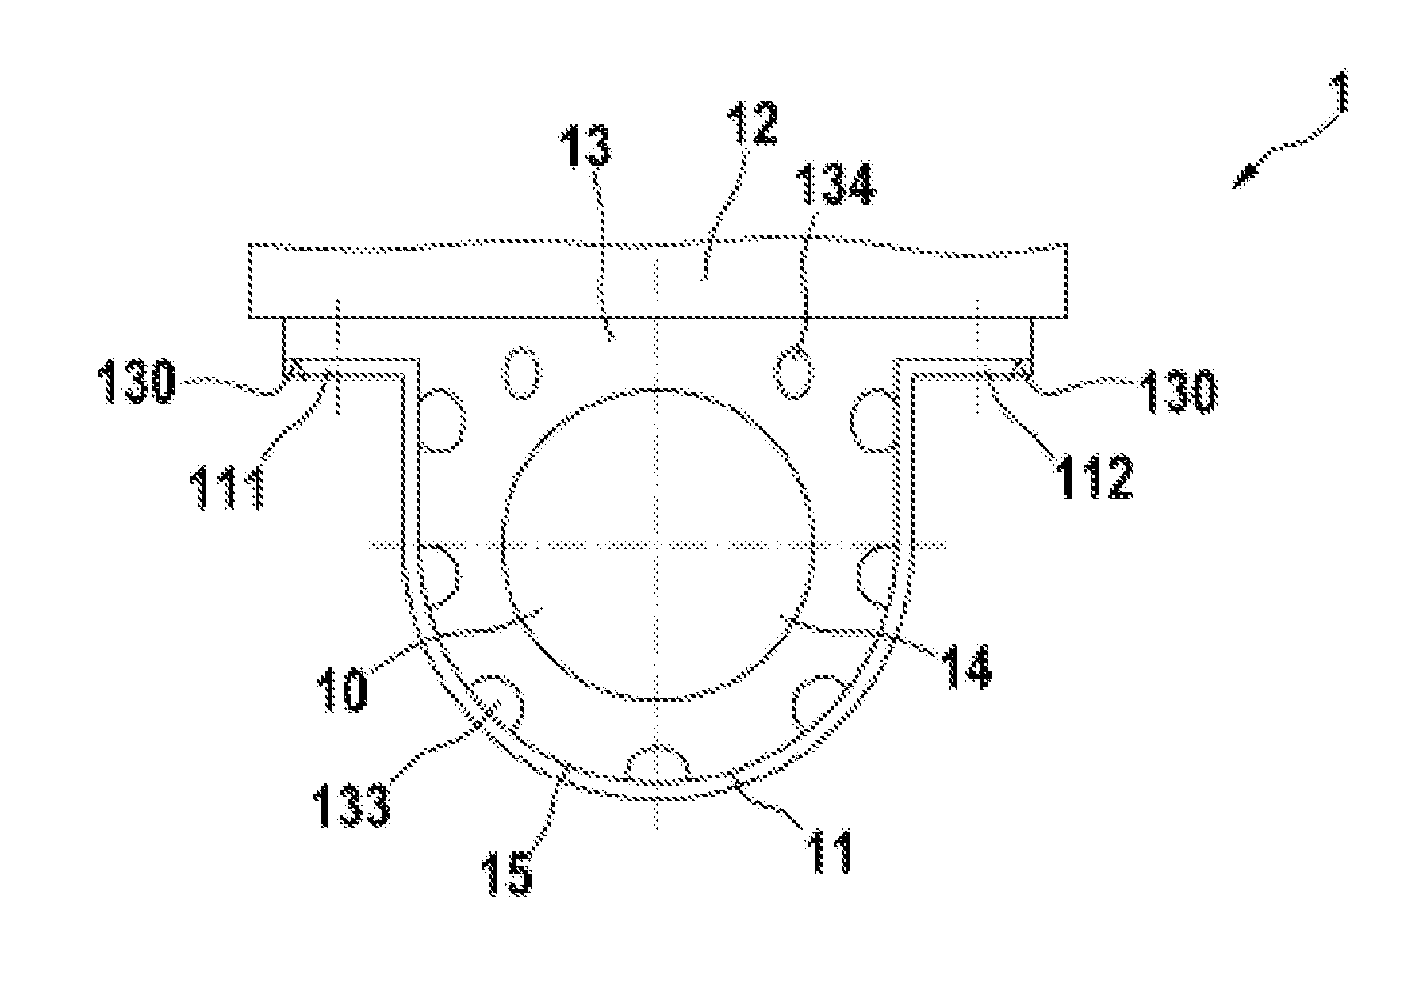 Holder for attaching an assembly